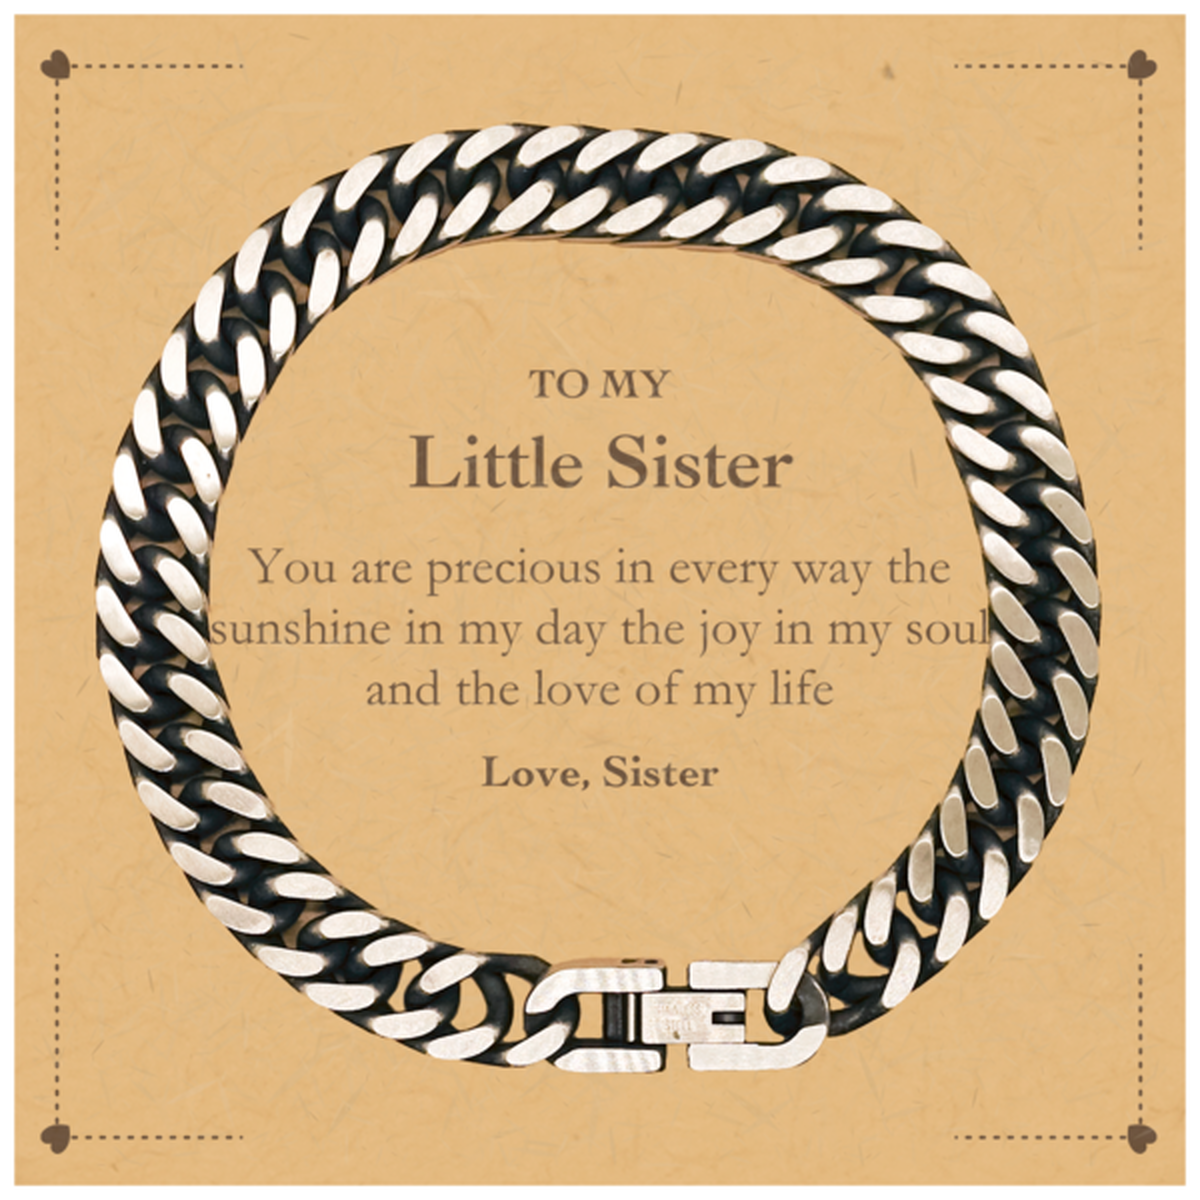 Graduation Gifts for Little Sister Cuban Link Chain Bracelet Present from Sister, Christmas Little Sister Birthday Gifts Little Sister You are precious in every way the sunshine in my day. Love, Sister